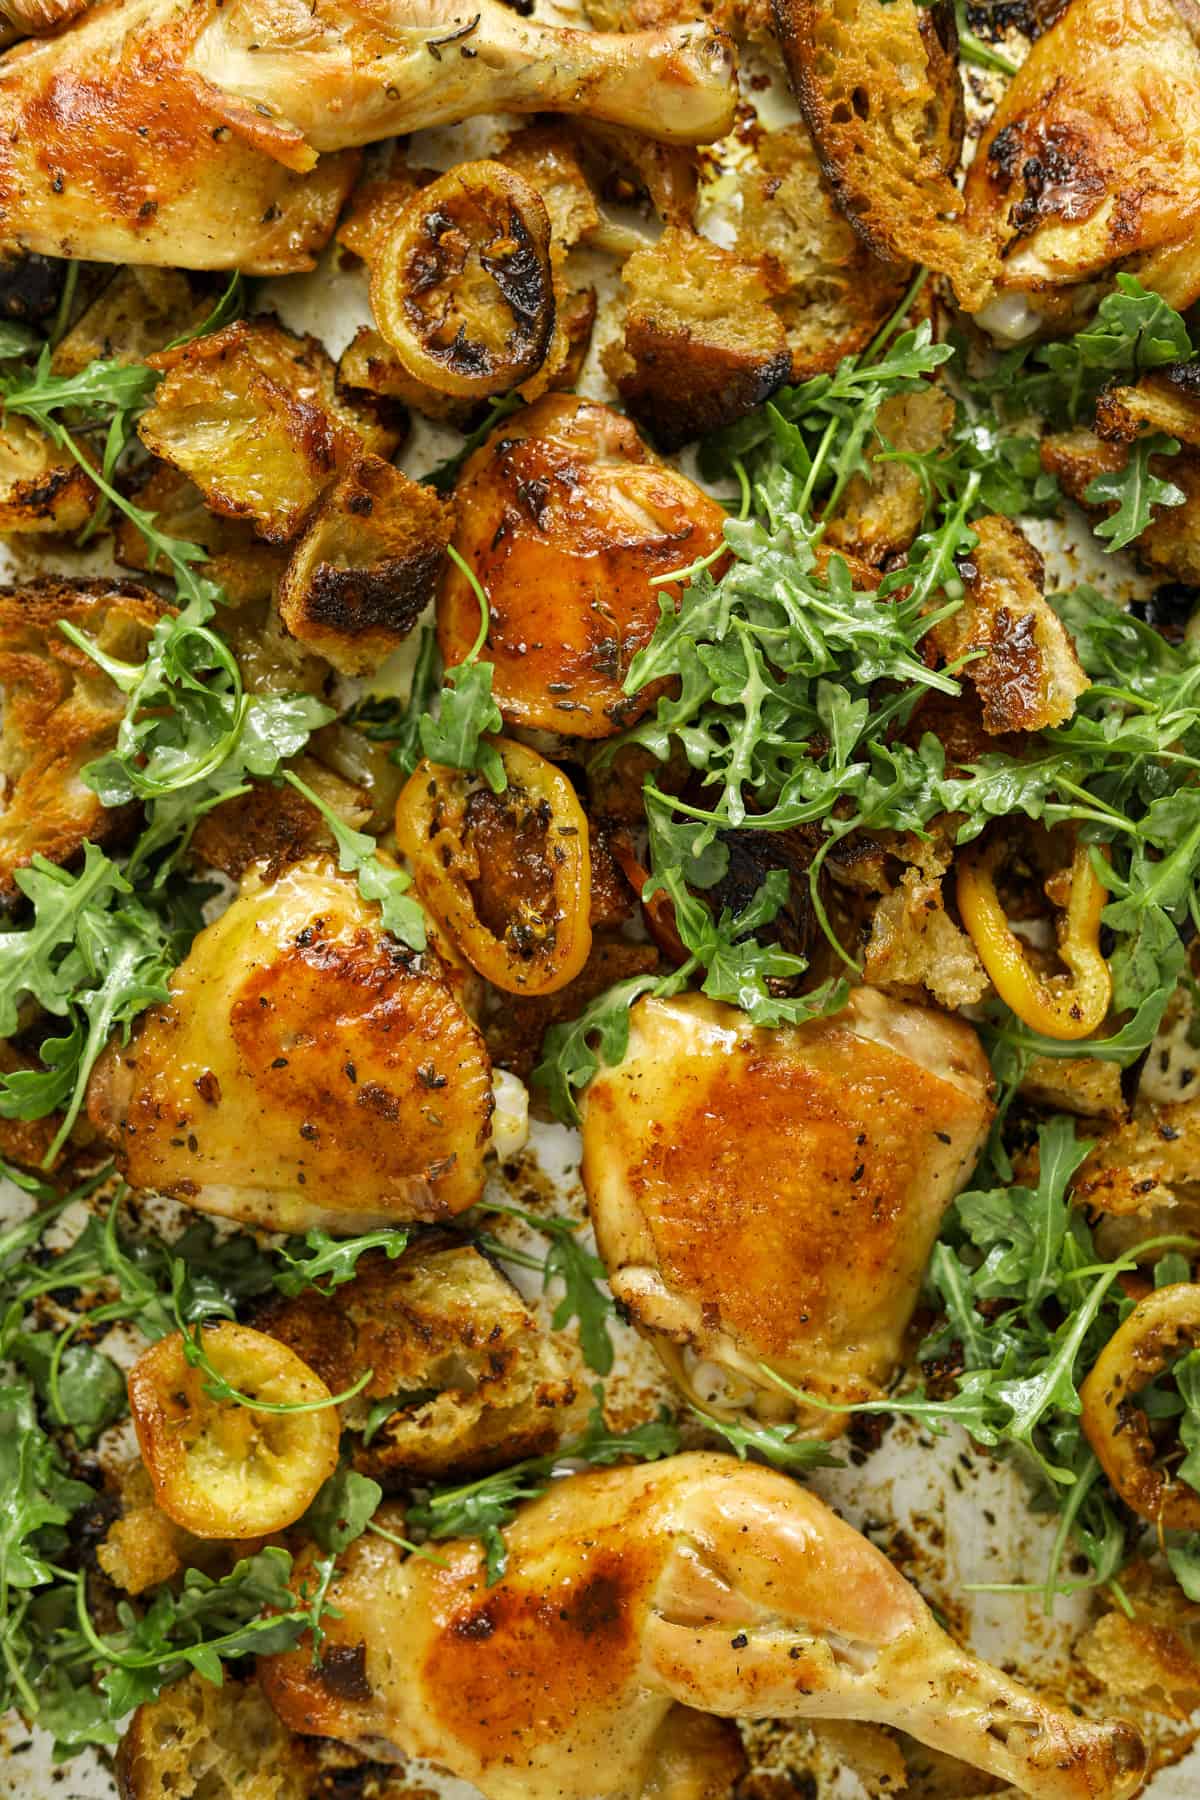 a baking tray with roasted chicken legs and thighs, charred lemon rounds, toasted bread and fresh arugula salad on top.